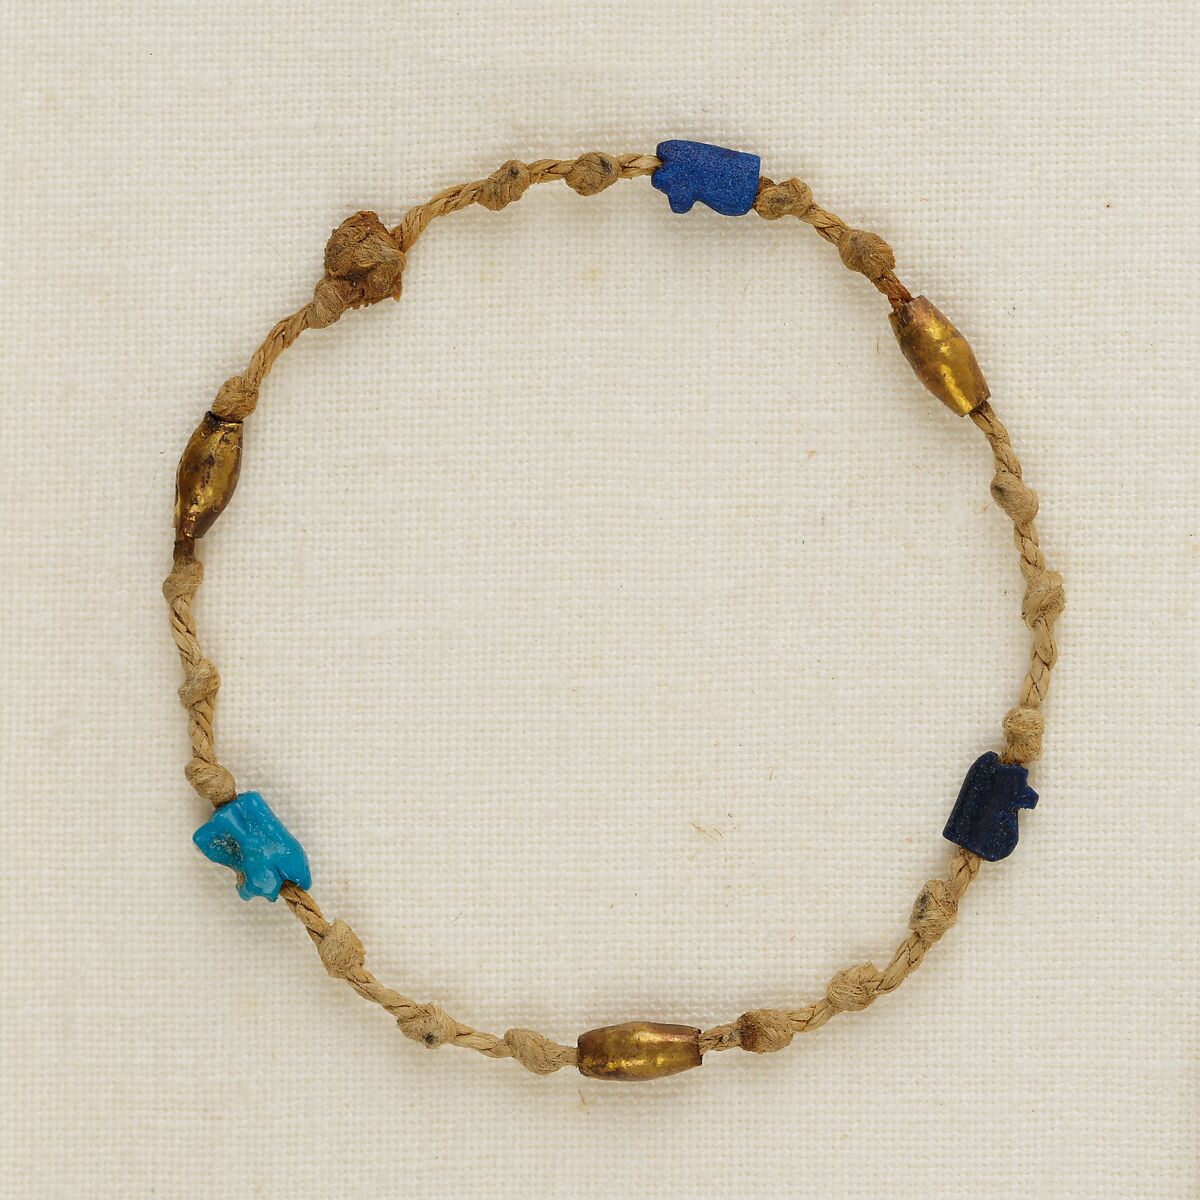 Bracelet with wedjat eye amulets and barrel beads, Linen, gold, glass, faience 